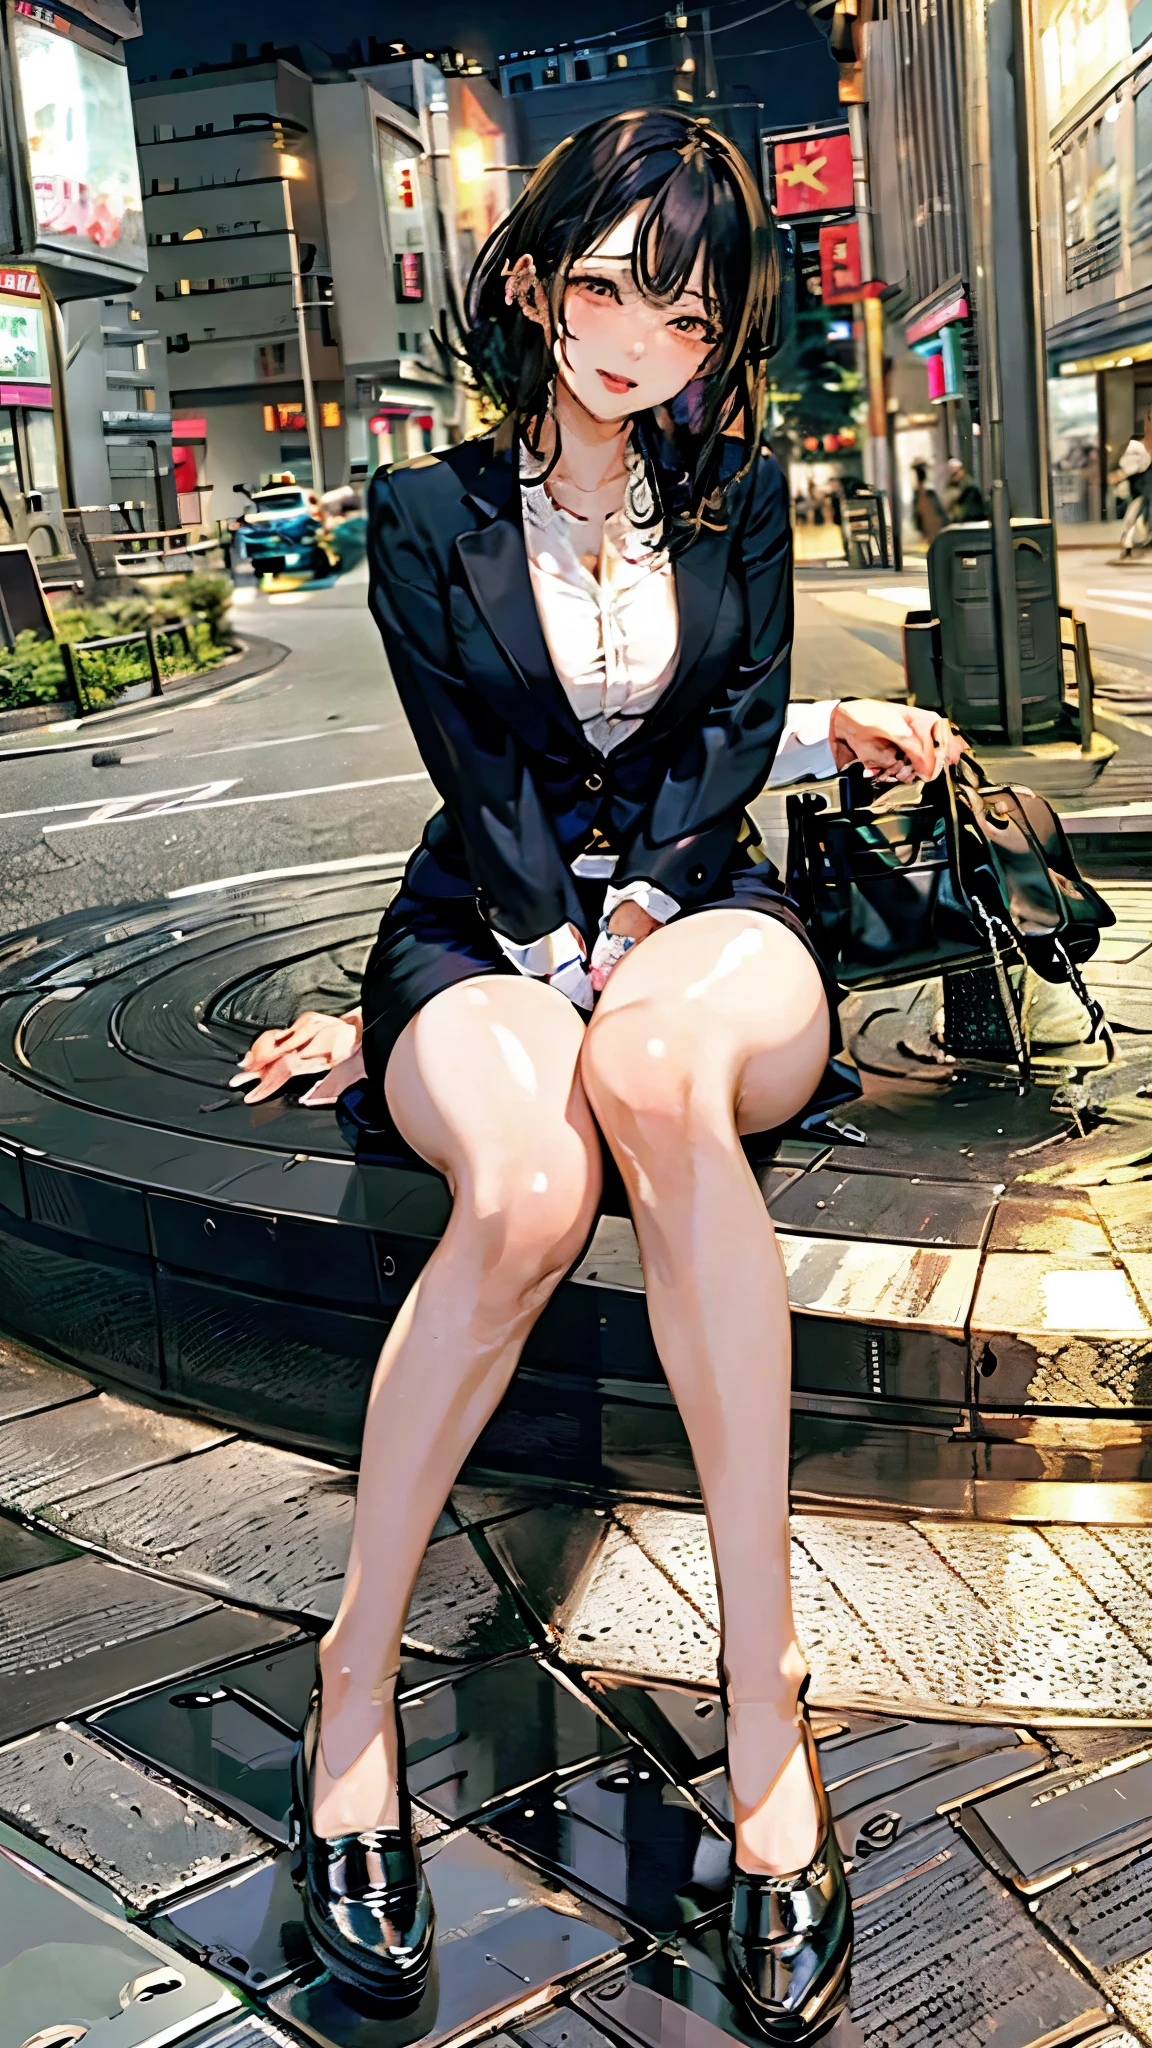 Publicly available images:2.0,Company receptionist,open legs,ID card,Sweat,Disheveled Hair,Job hunting suit:1.5,Ahegao,orgasm:1.5, Pencil Skirt,High heels,groupshot,multiple women:1.5,Very sexual legs,attractive thighs